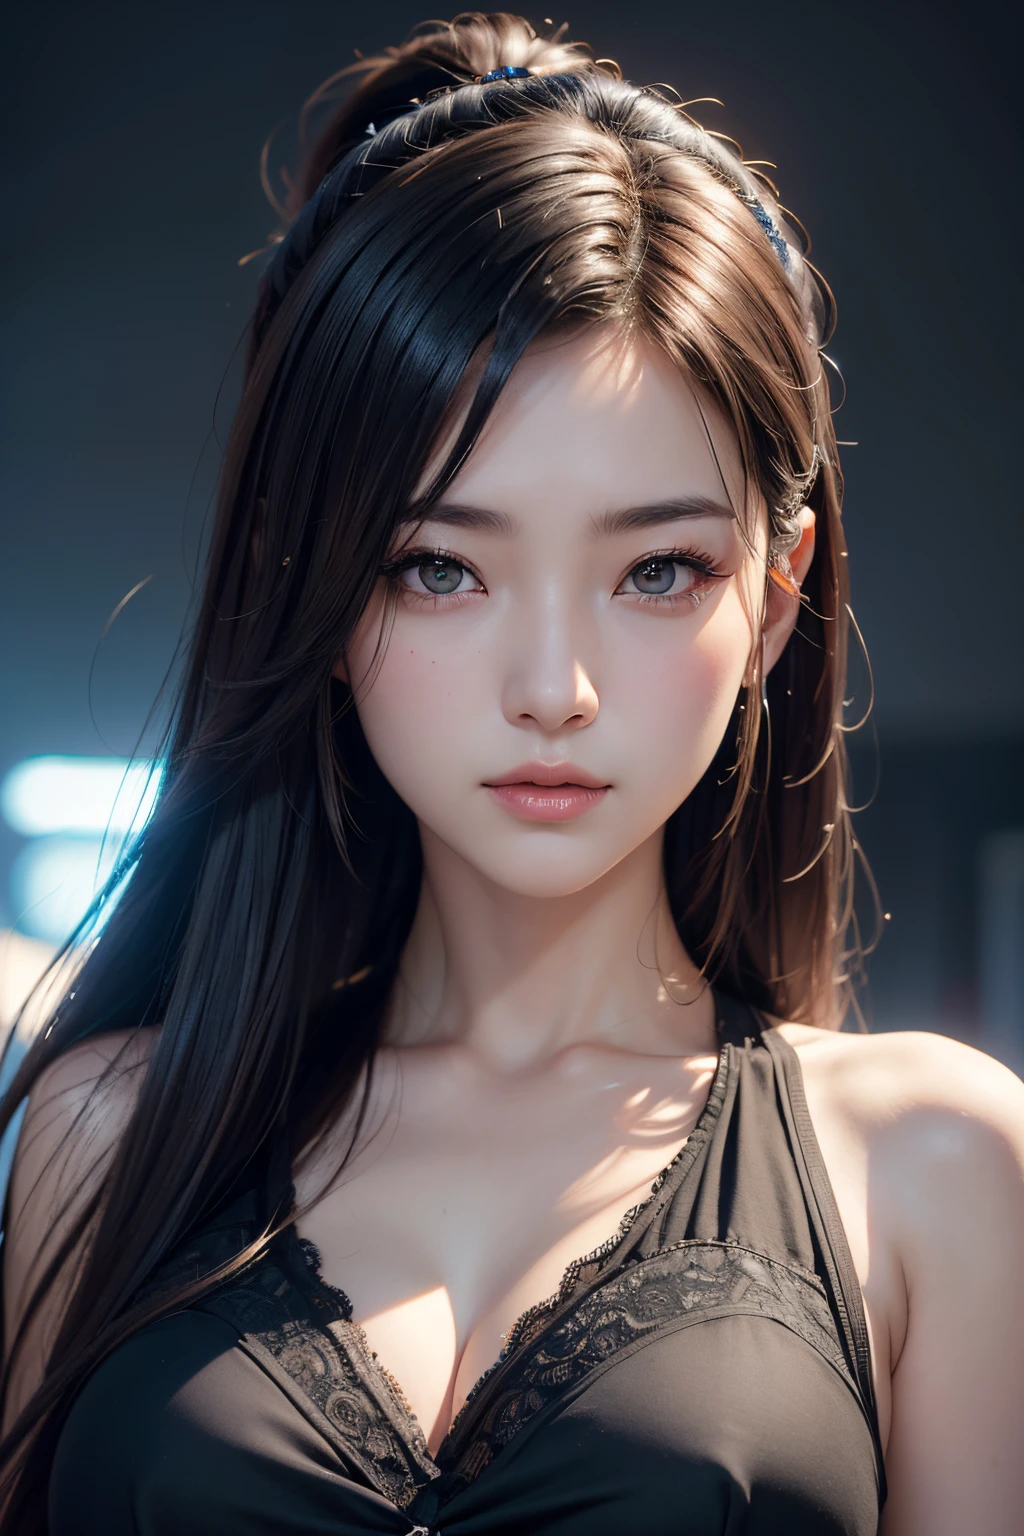 ​masterpiece, 1 beautiful girls, detaileds, Swollen eyes, top-quality, 超A high resolution, (Reality: 1.4), OriginalPhotographs, 1girl in, light, (A smile,:0.5) japanes, Asian Beauty, Korean, Proper, very extremely beautiful, Slightly younger face, Beautiful skins, slender, cyberpunk backgrouns, (A hyper-realistic), (illustratio), (hight resolution), (8K), (ighly detailed), (Beautifully detailed eyes with the best illustrations), (Ultra-detail), (wall-), (Detailed face), looking at the viewers, fine detailed, A detailed face、deep-shadows、Unobtrusive、pureerosfaceace_v1、Score 46 points with a diagonal straight.　garconne look Maid,、Black colored eyes、